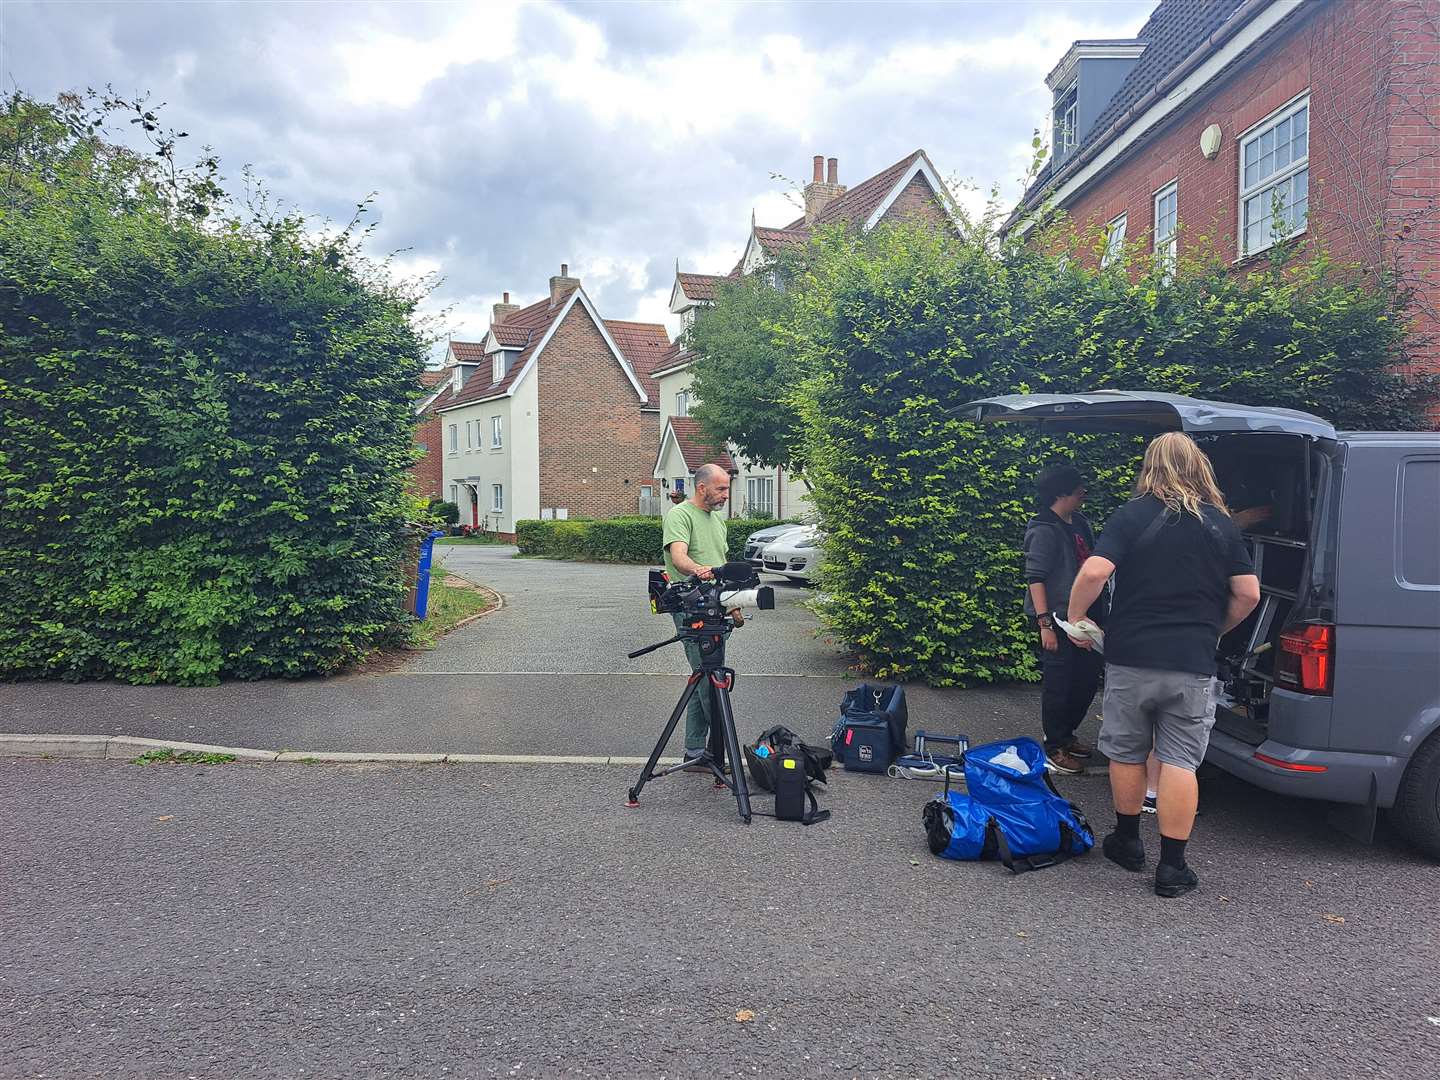 A film crew and Rylan Clarke were spotted in Kingfisher Road Bury St Edmunds back in July. Picture: Ash Jones